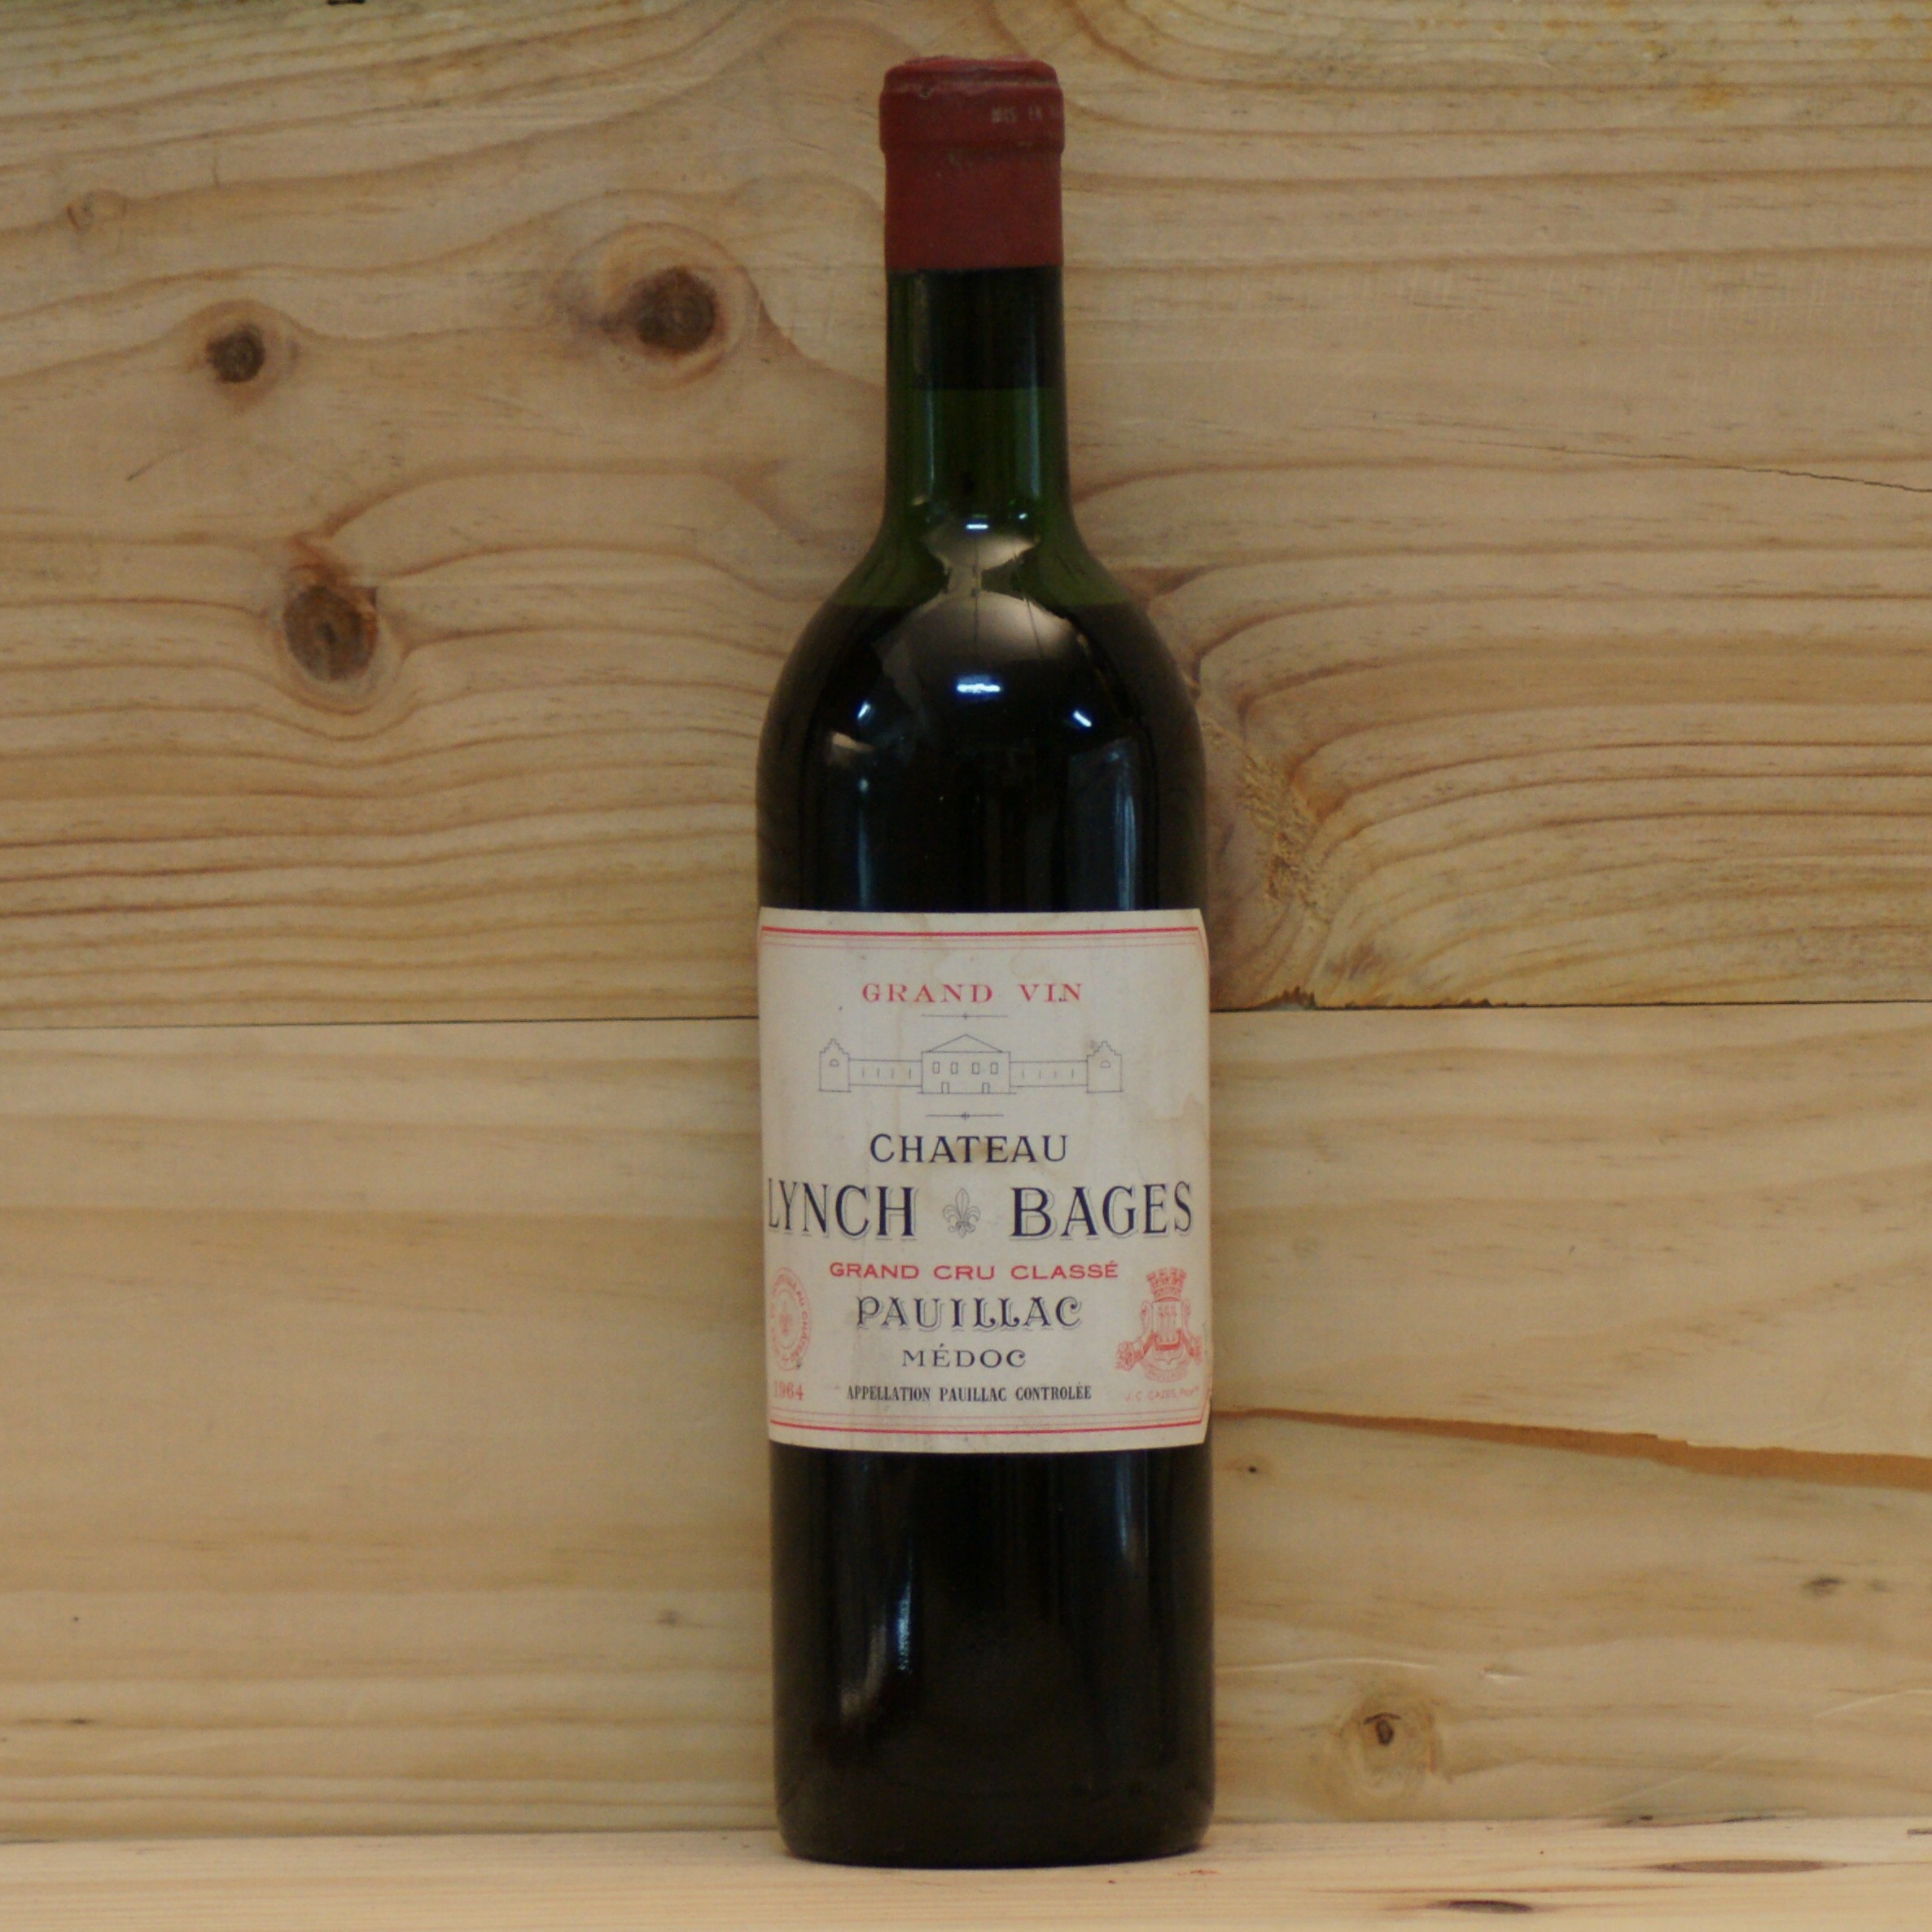 1964 Chateau Lynch Bages